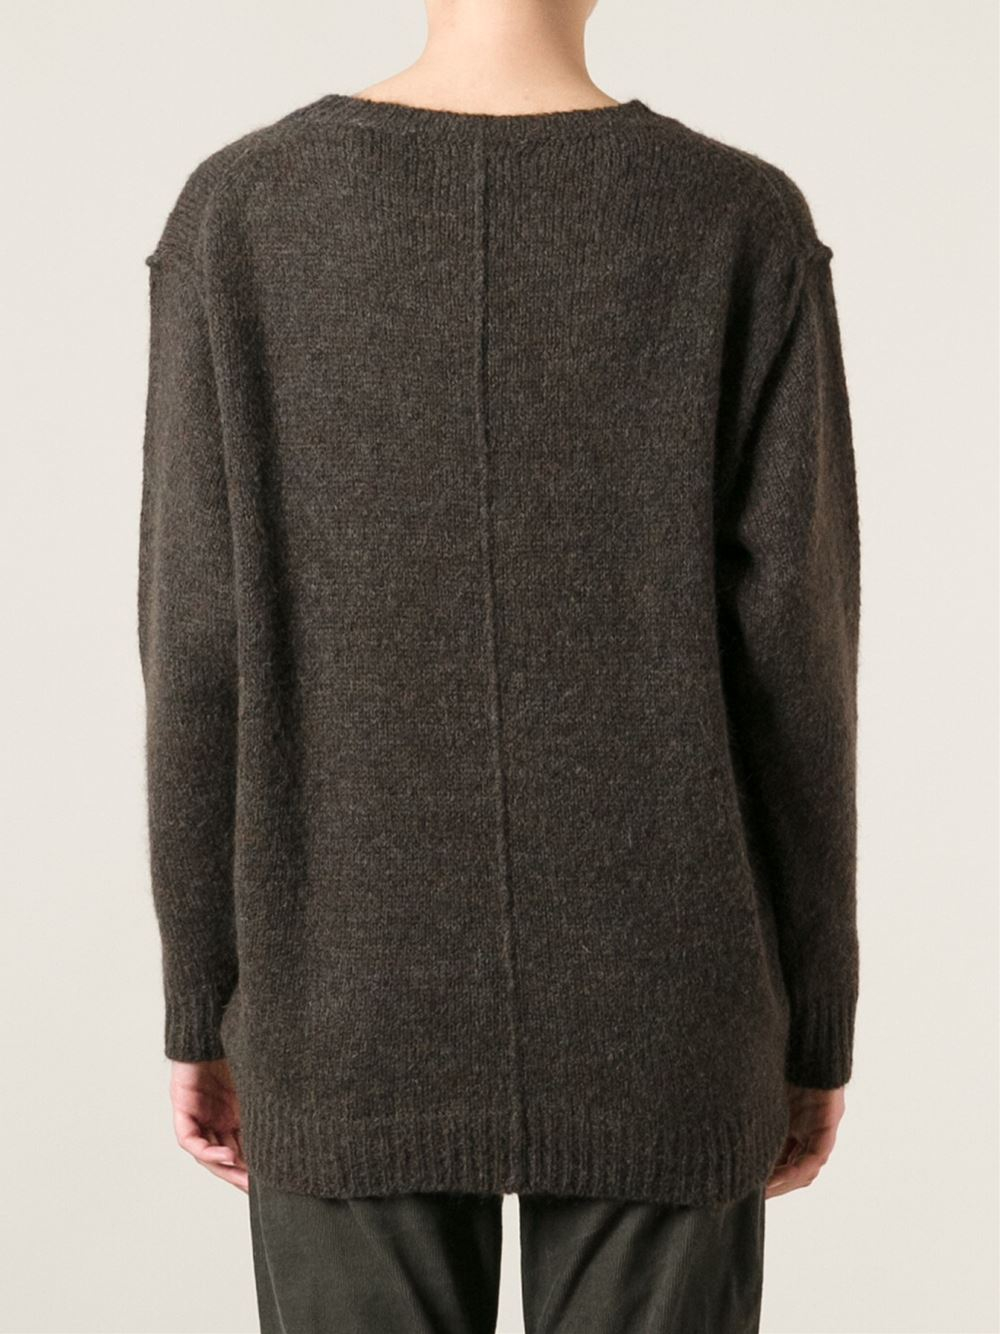 Étoile Isabel Marant 'Rikers' Sweater in Brown - Lyst